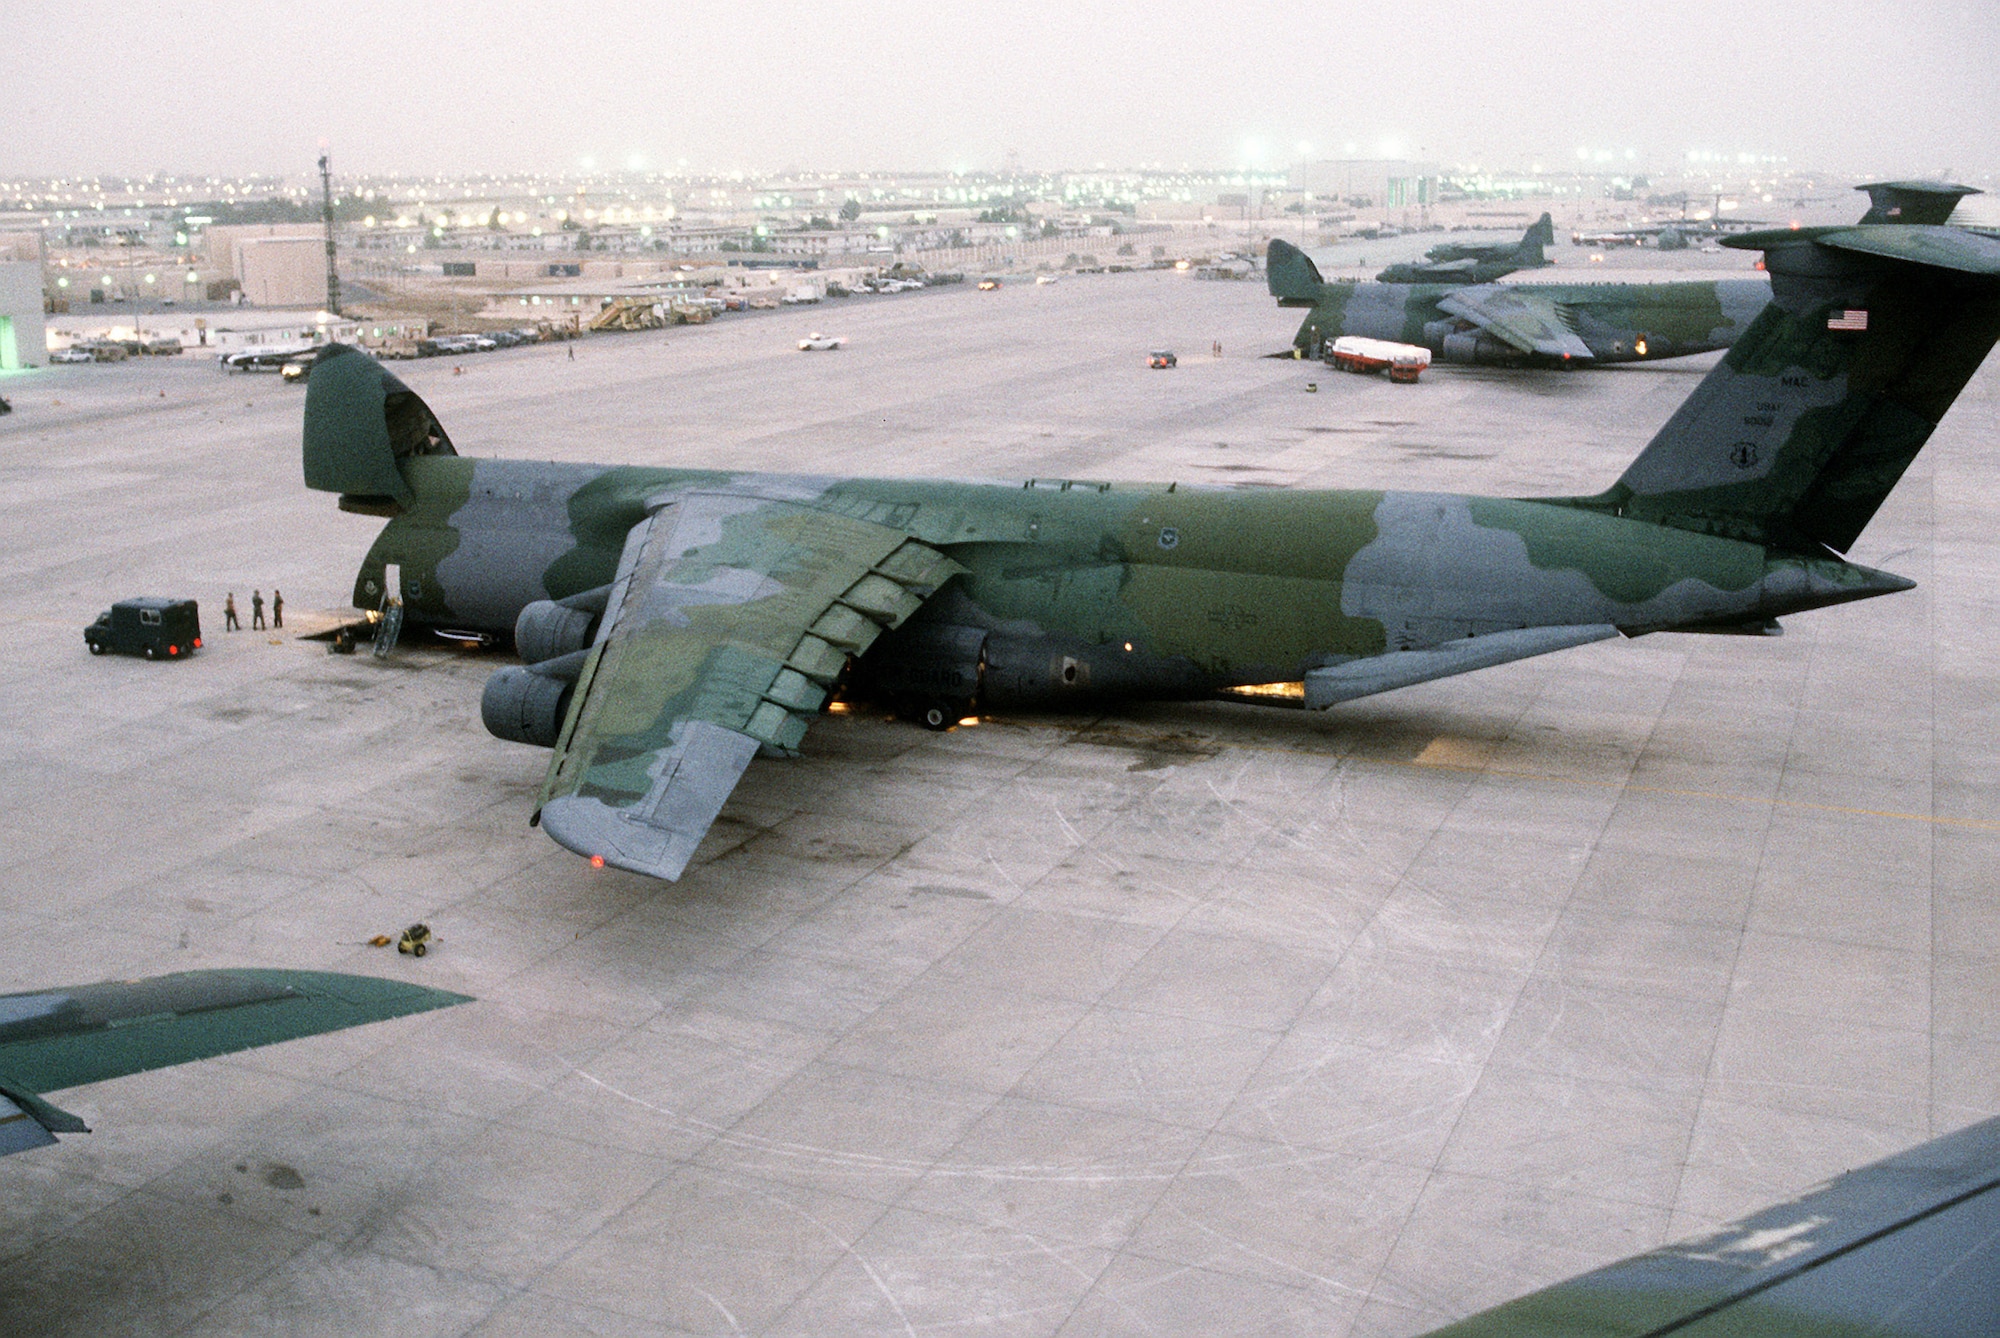 1990's -- Supplies and equipment are unloaded through the nose of a C-5A Galaxy transport aircraft of the U.S. Air Force Reserve, Military Airlift Command, in support of Operation Desert Shield.  